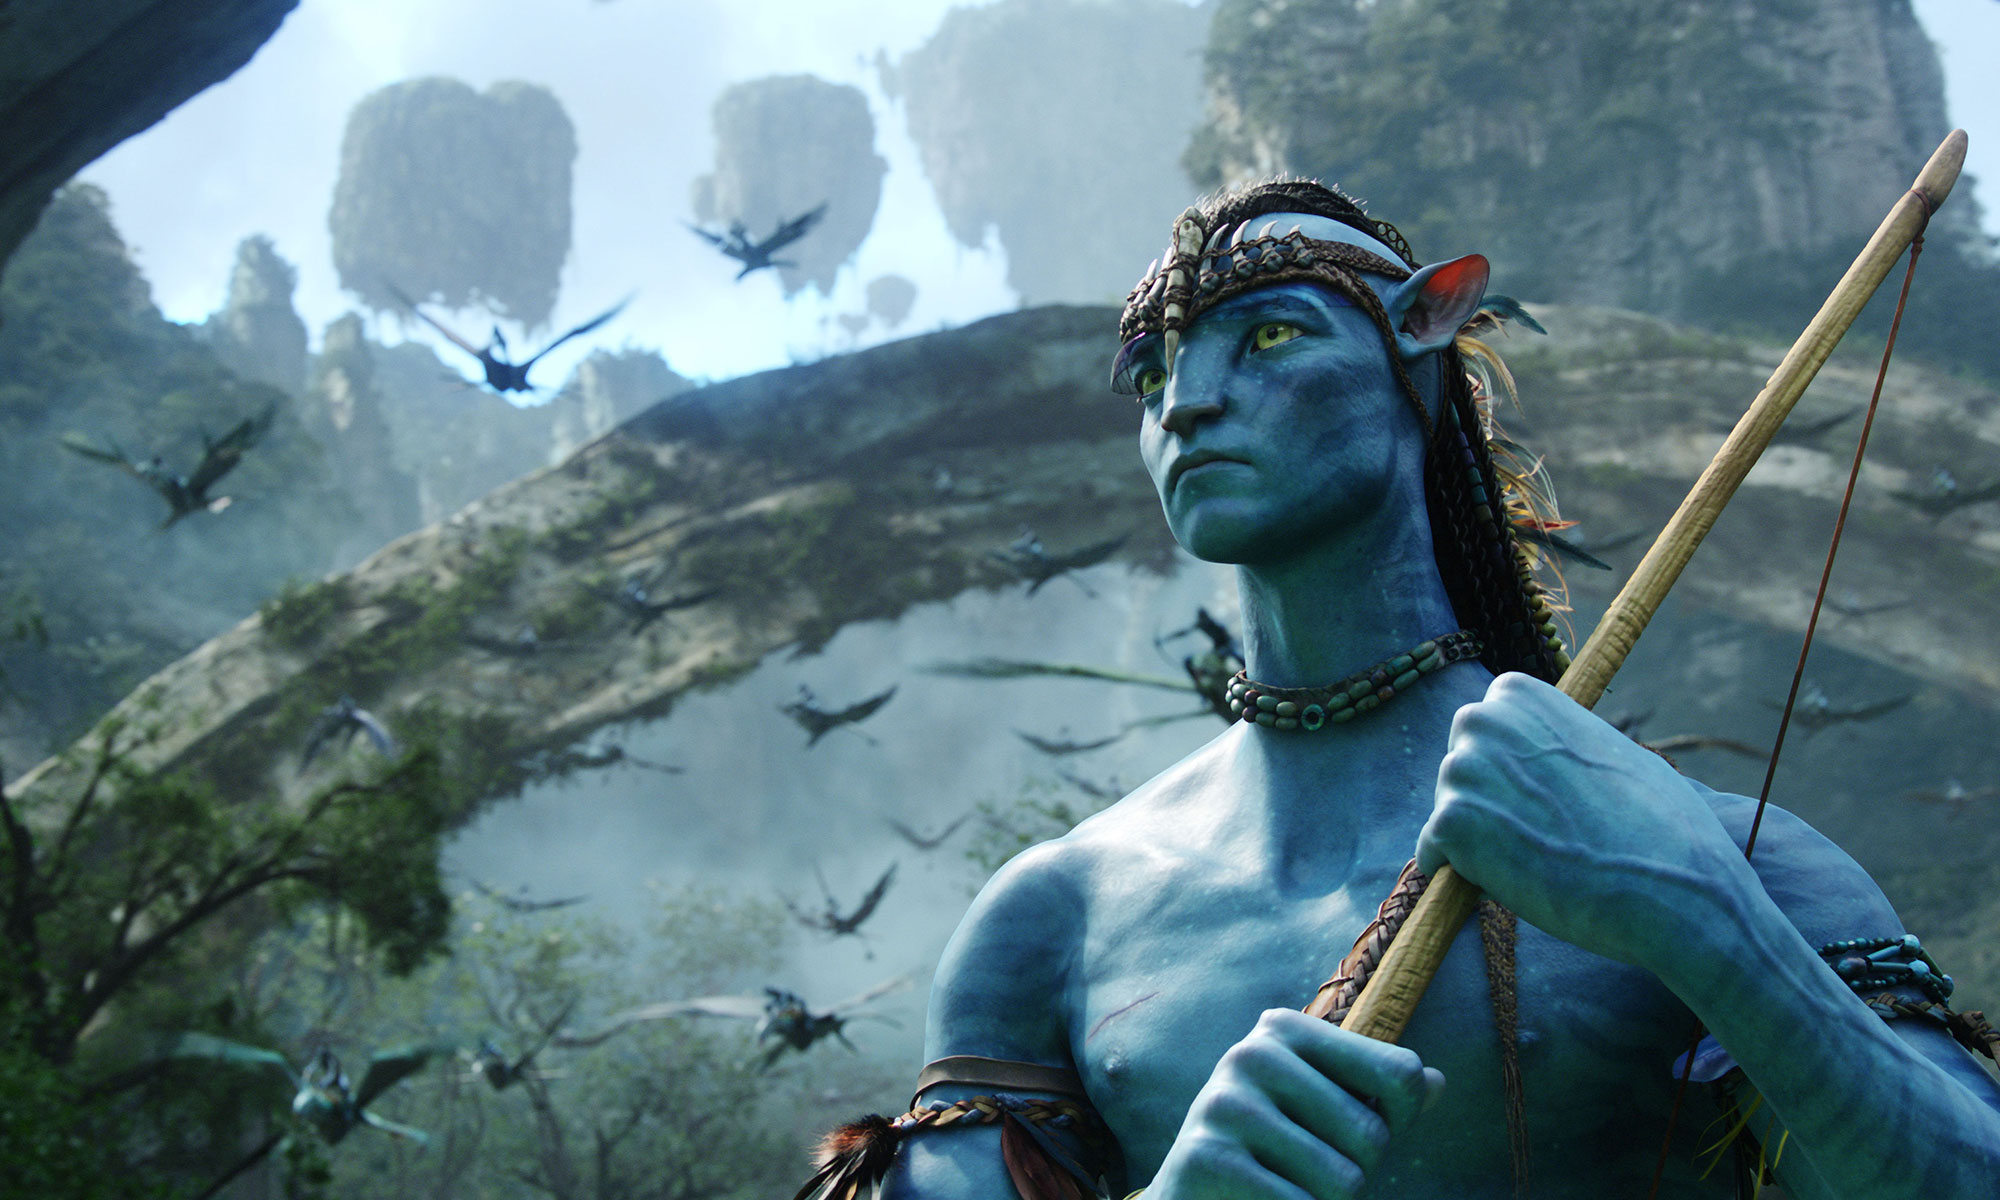 AVATAR: 'The King Welcomes You To Avatar Country' Video Released